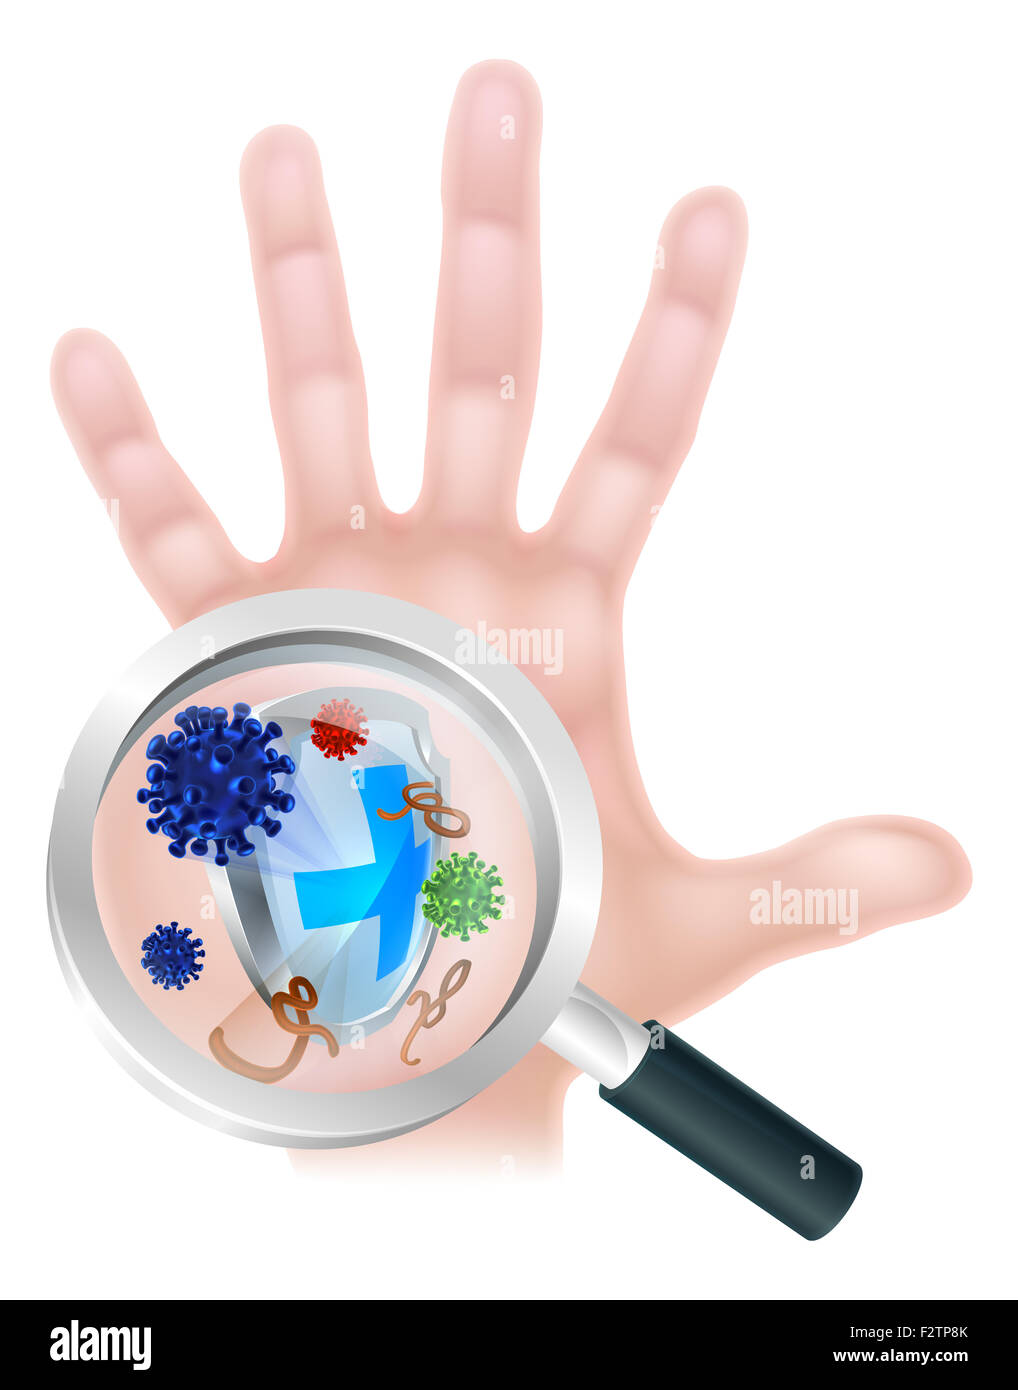 Hand wash shield protection magnifying glass bacteria virus hand concept of a magnifying glass zooming in on virus or bacteria c Stock Photo